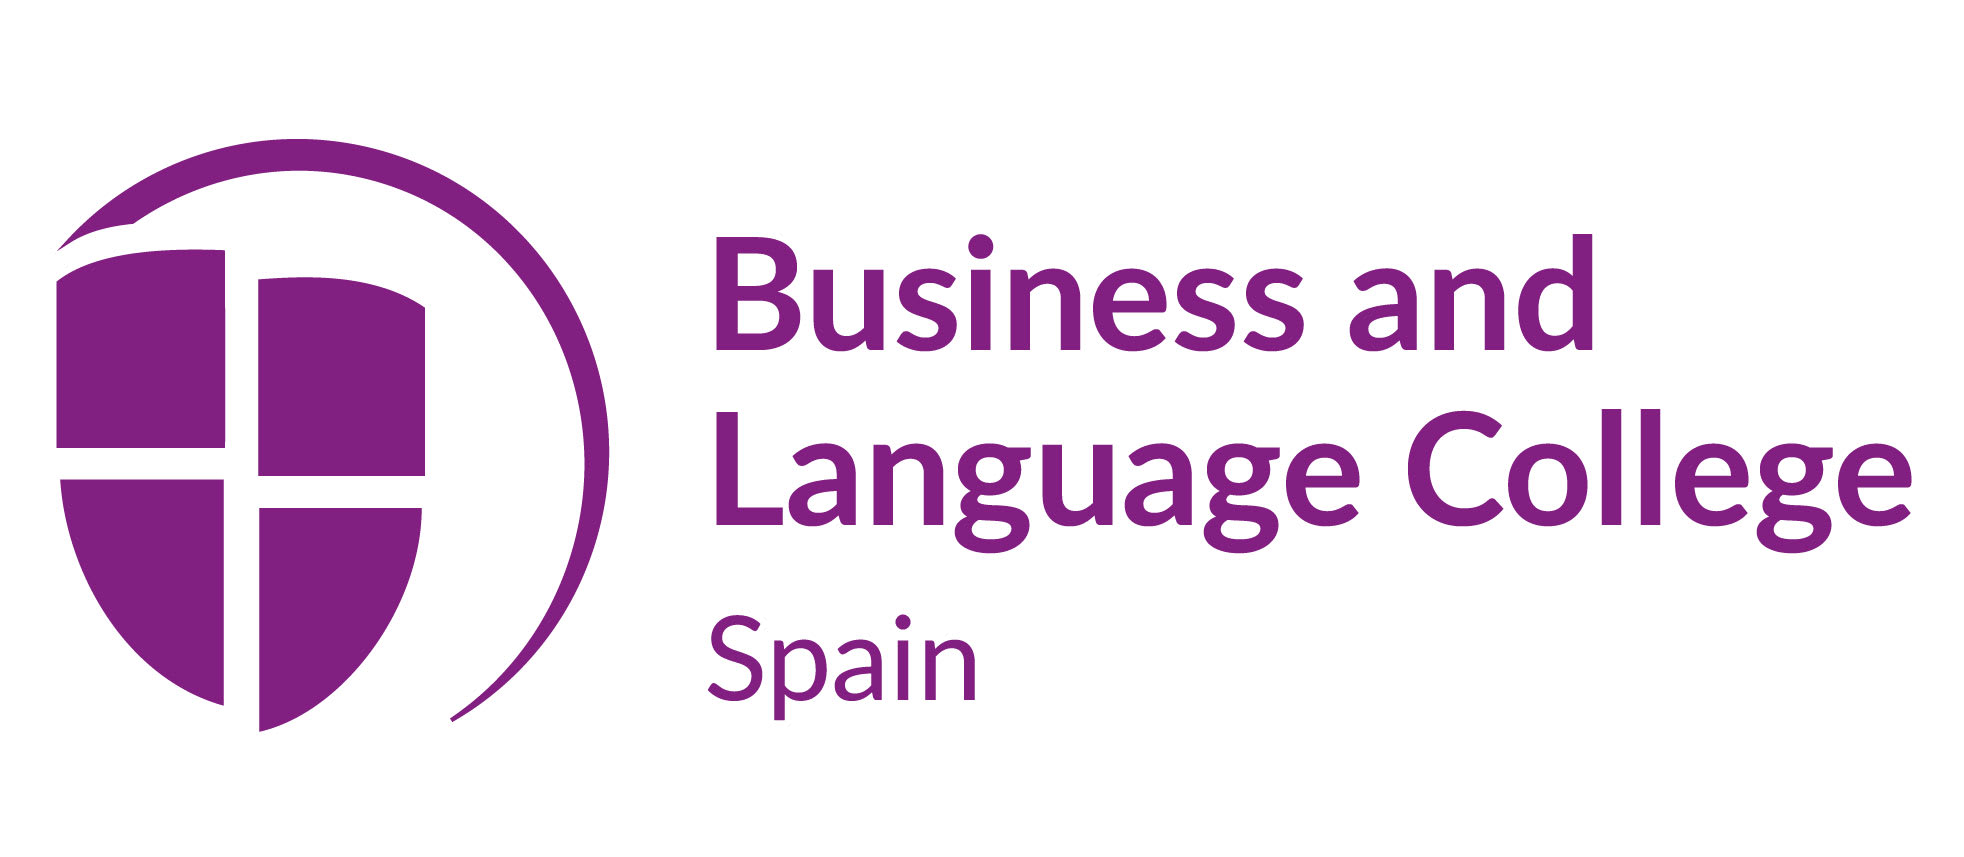 Business and Language College Spain